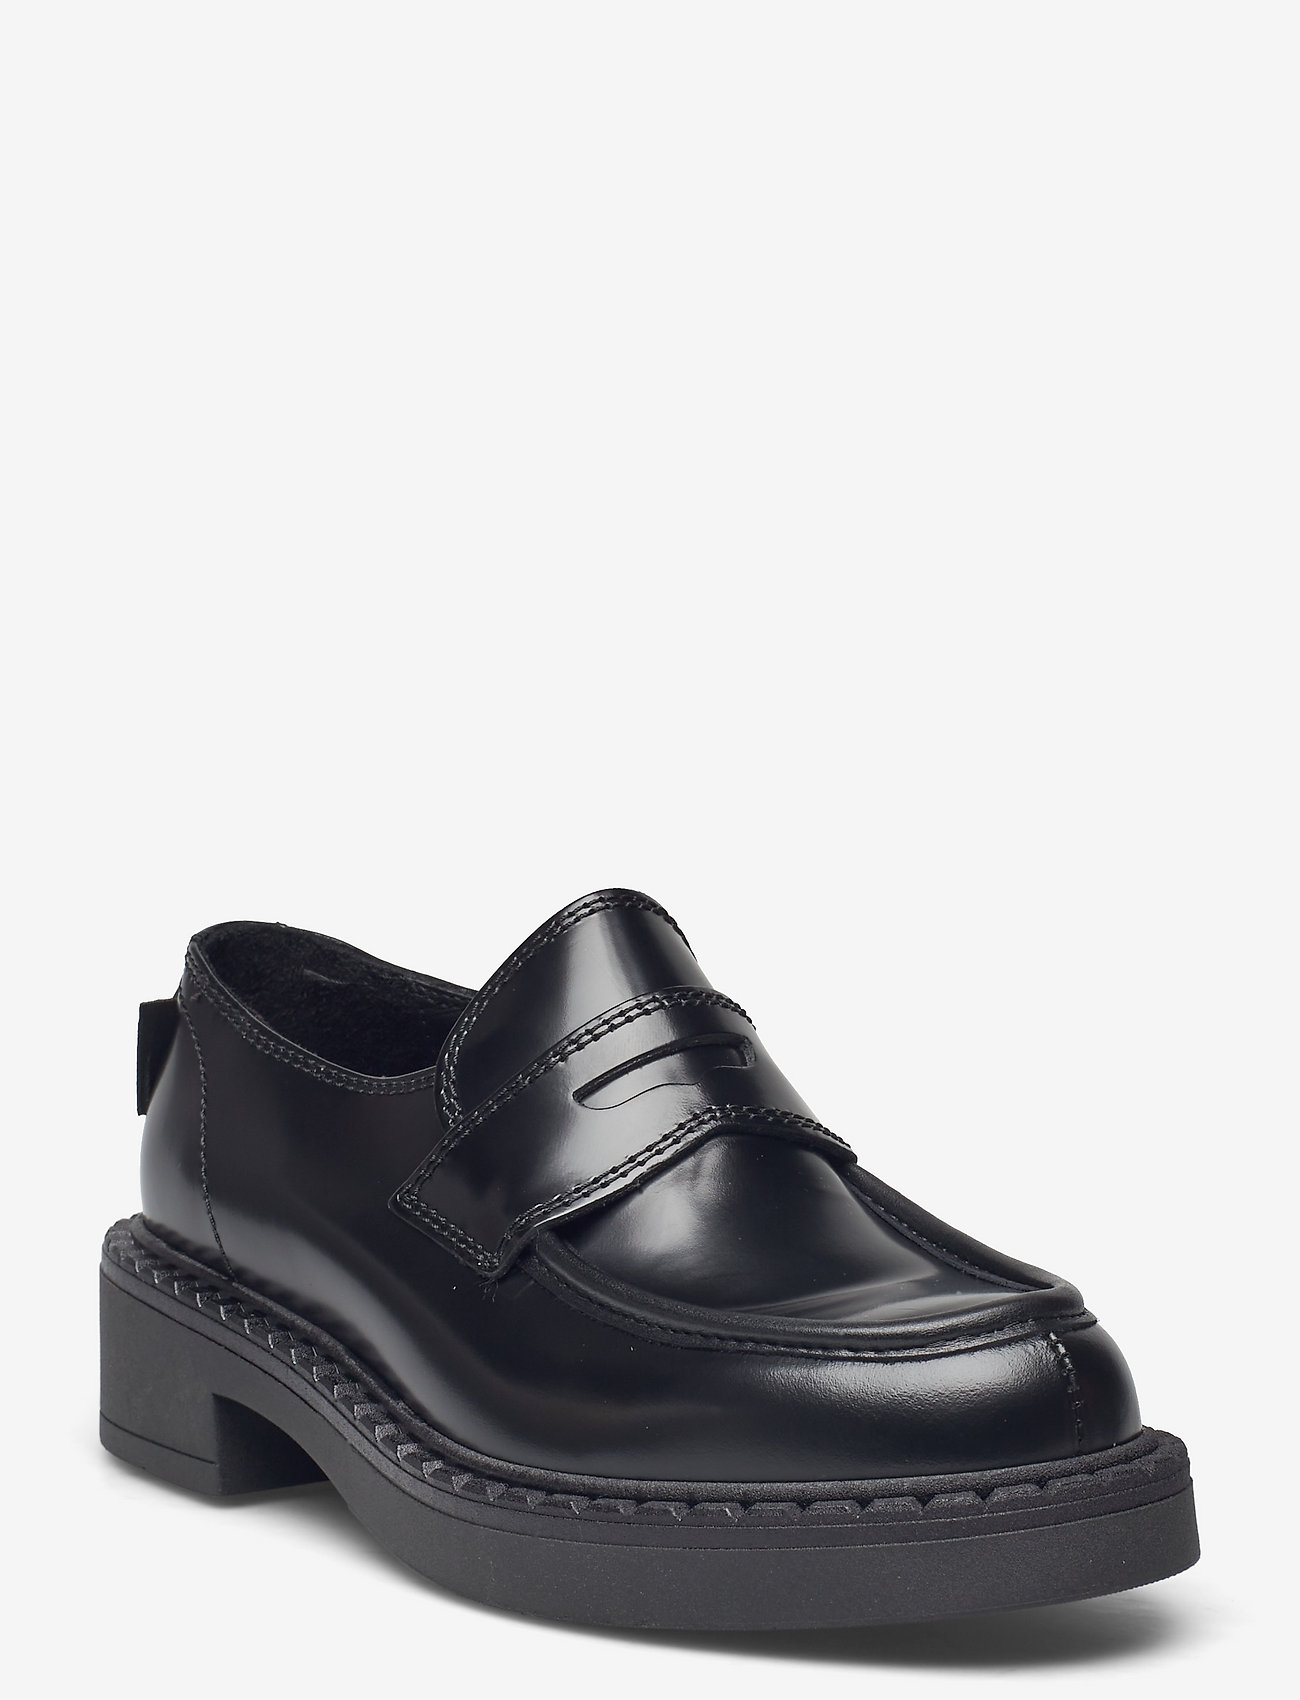 G.H. BASS - GH ALBANY II SADDLE LOAFER - loafers - black - 0